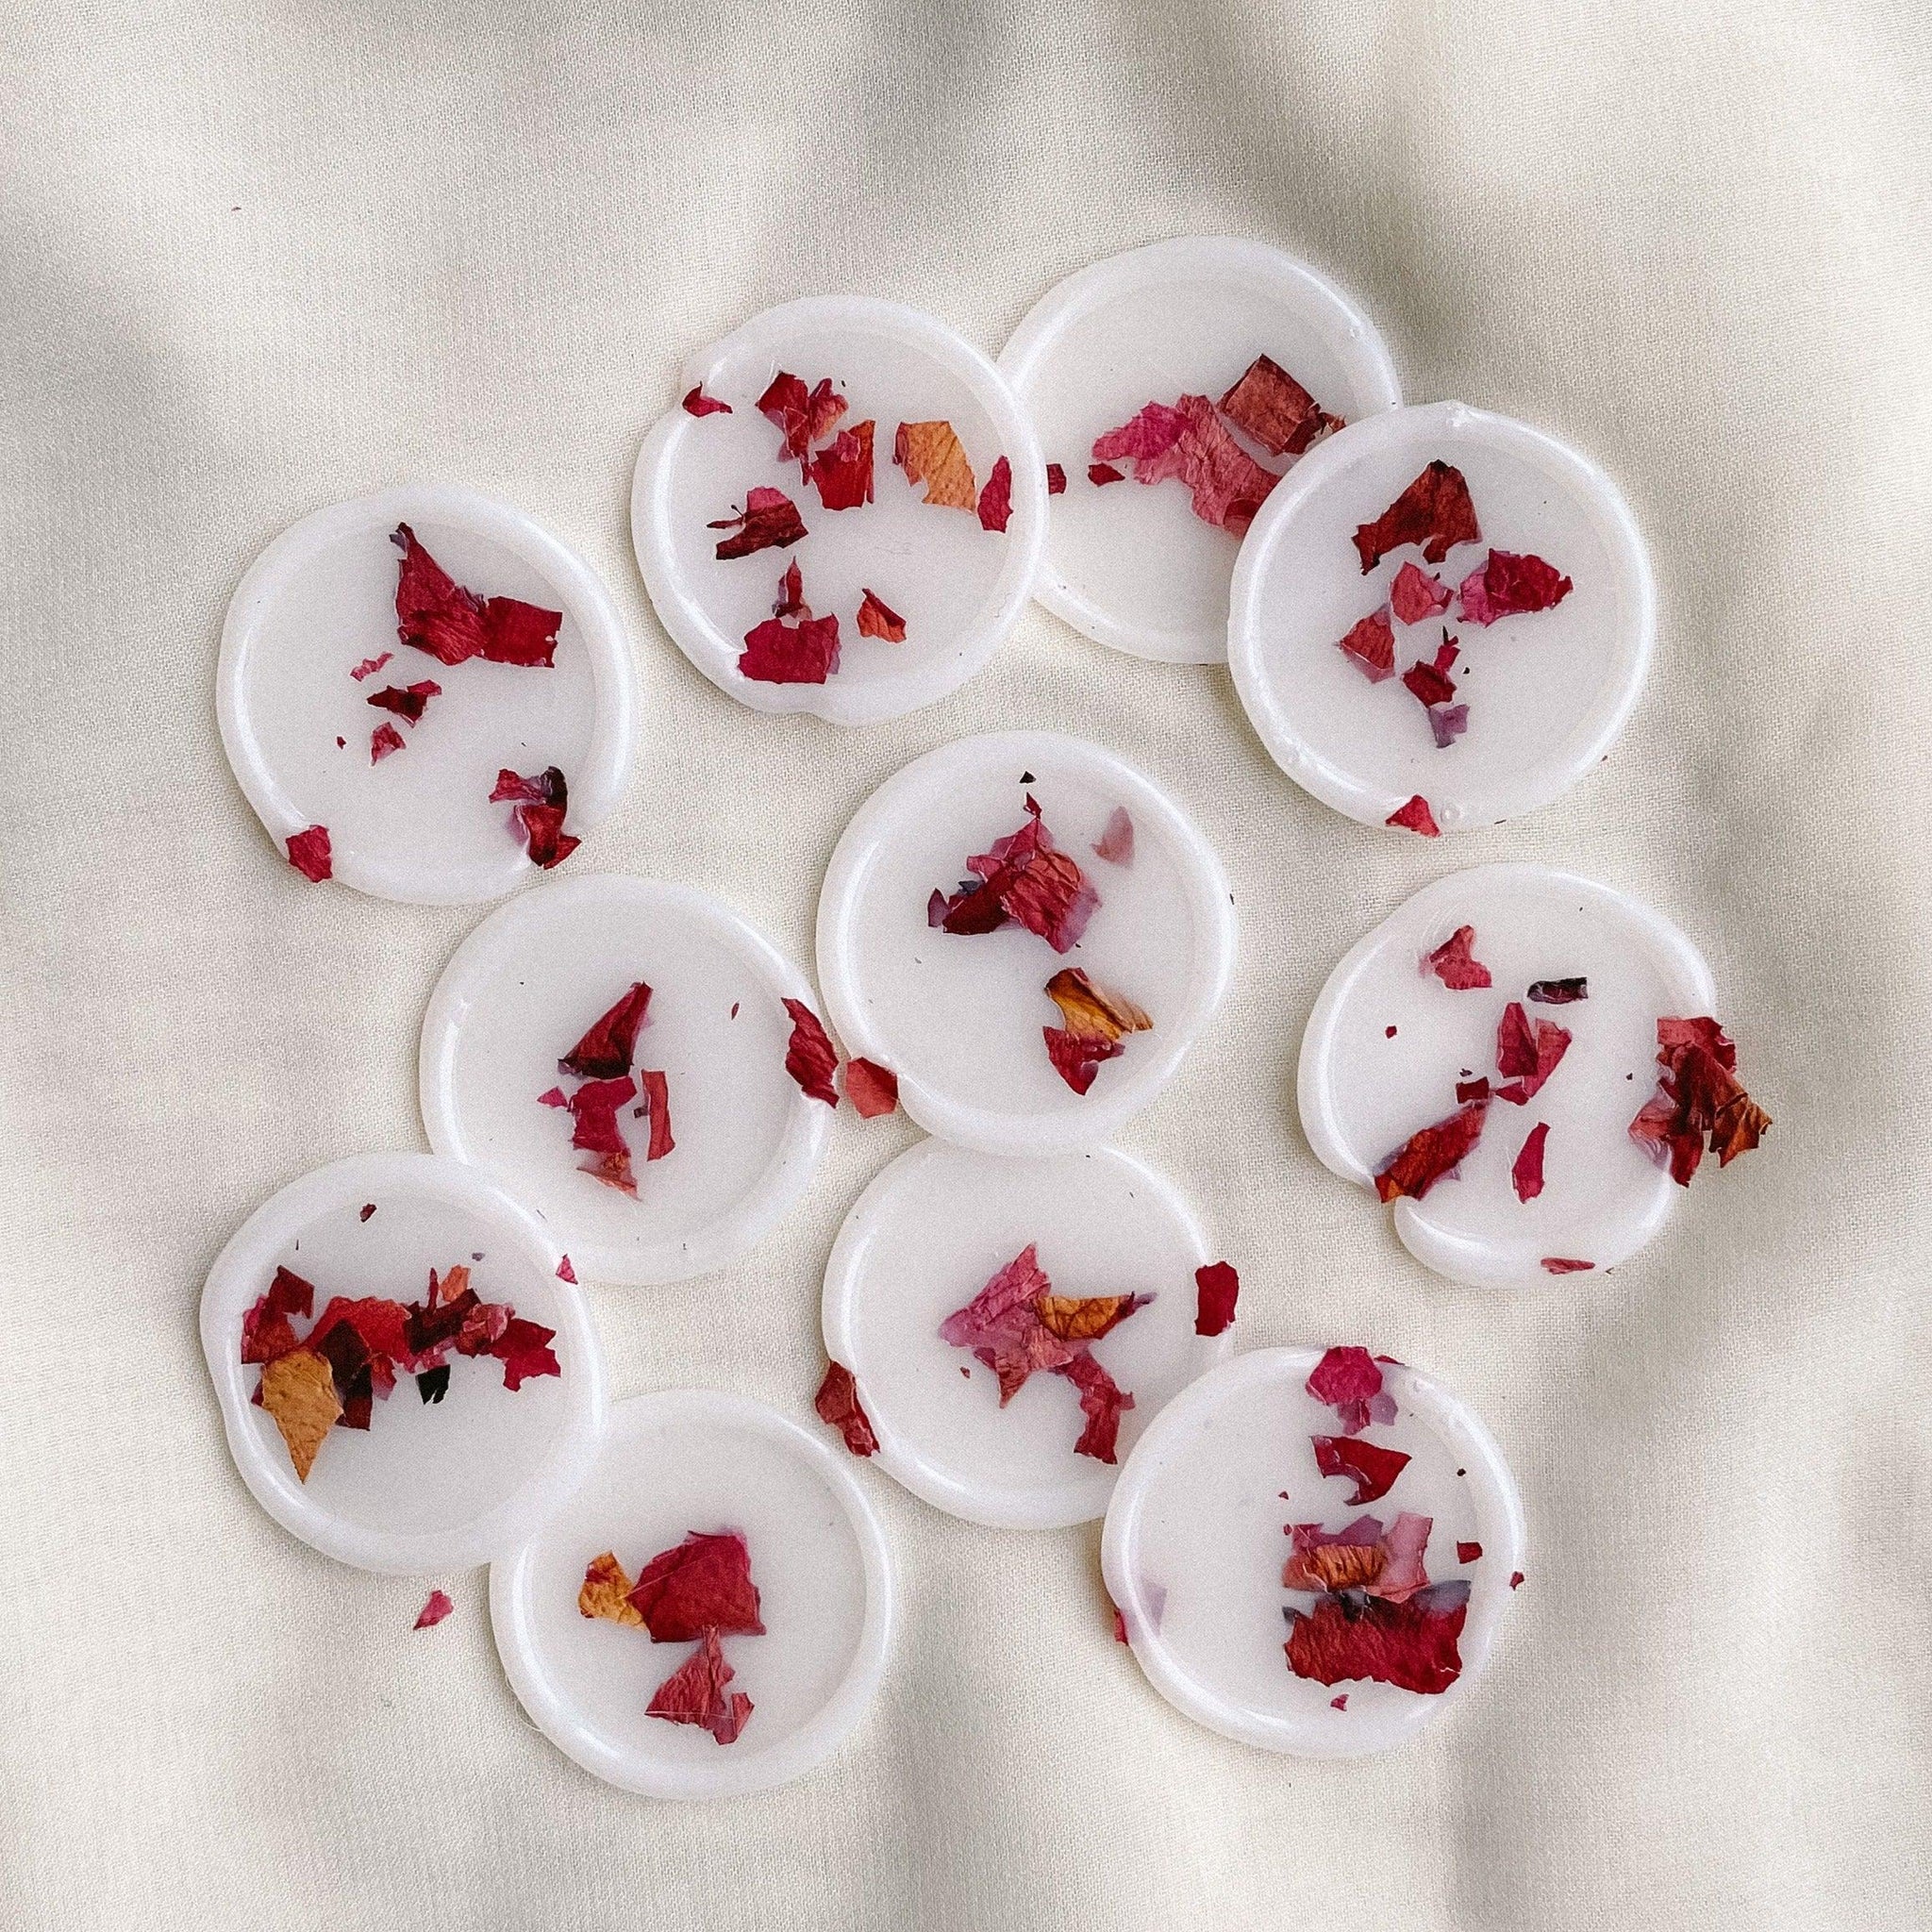 Dried roses wax seals - Set of 9 - Made of Honour Co.